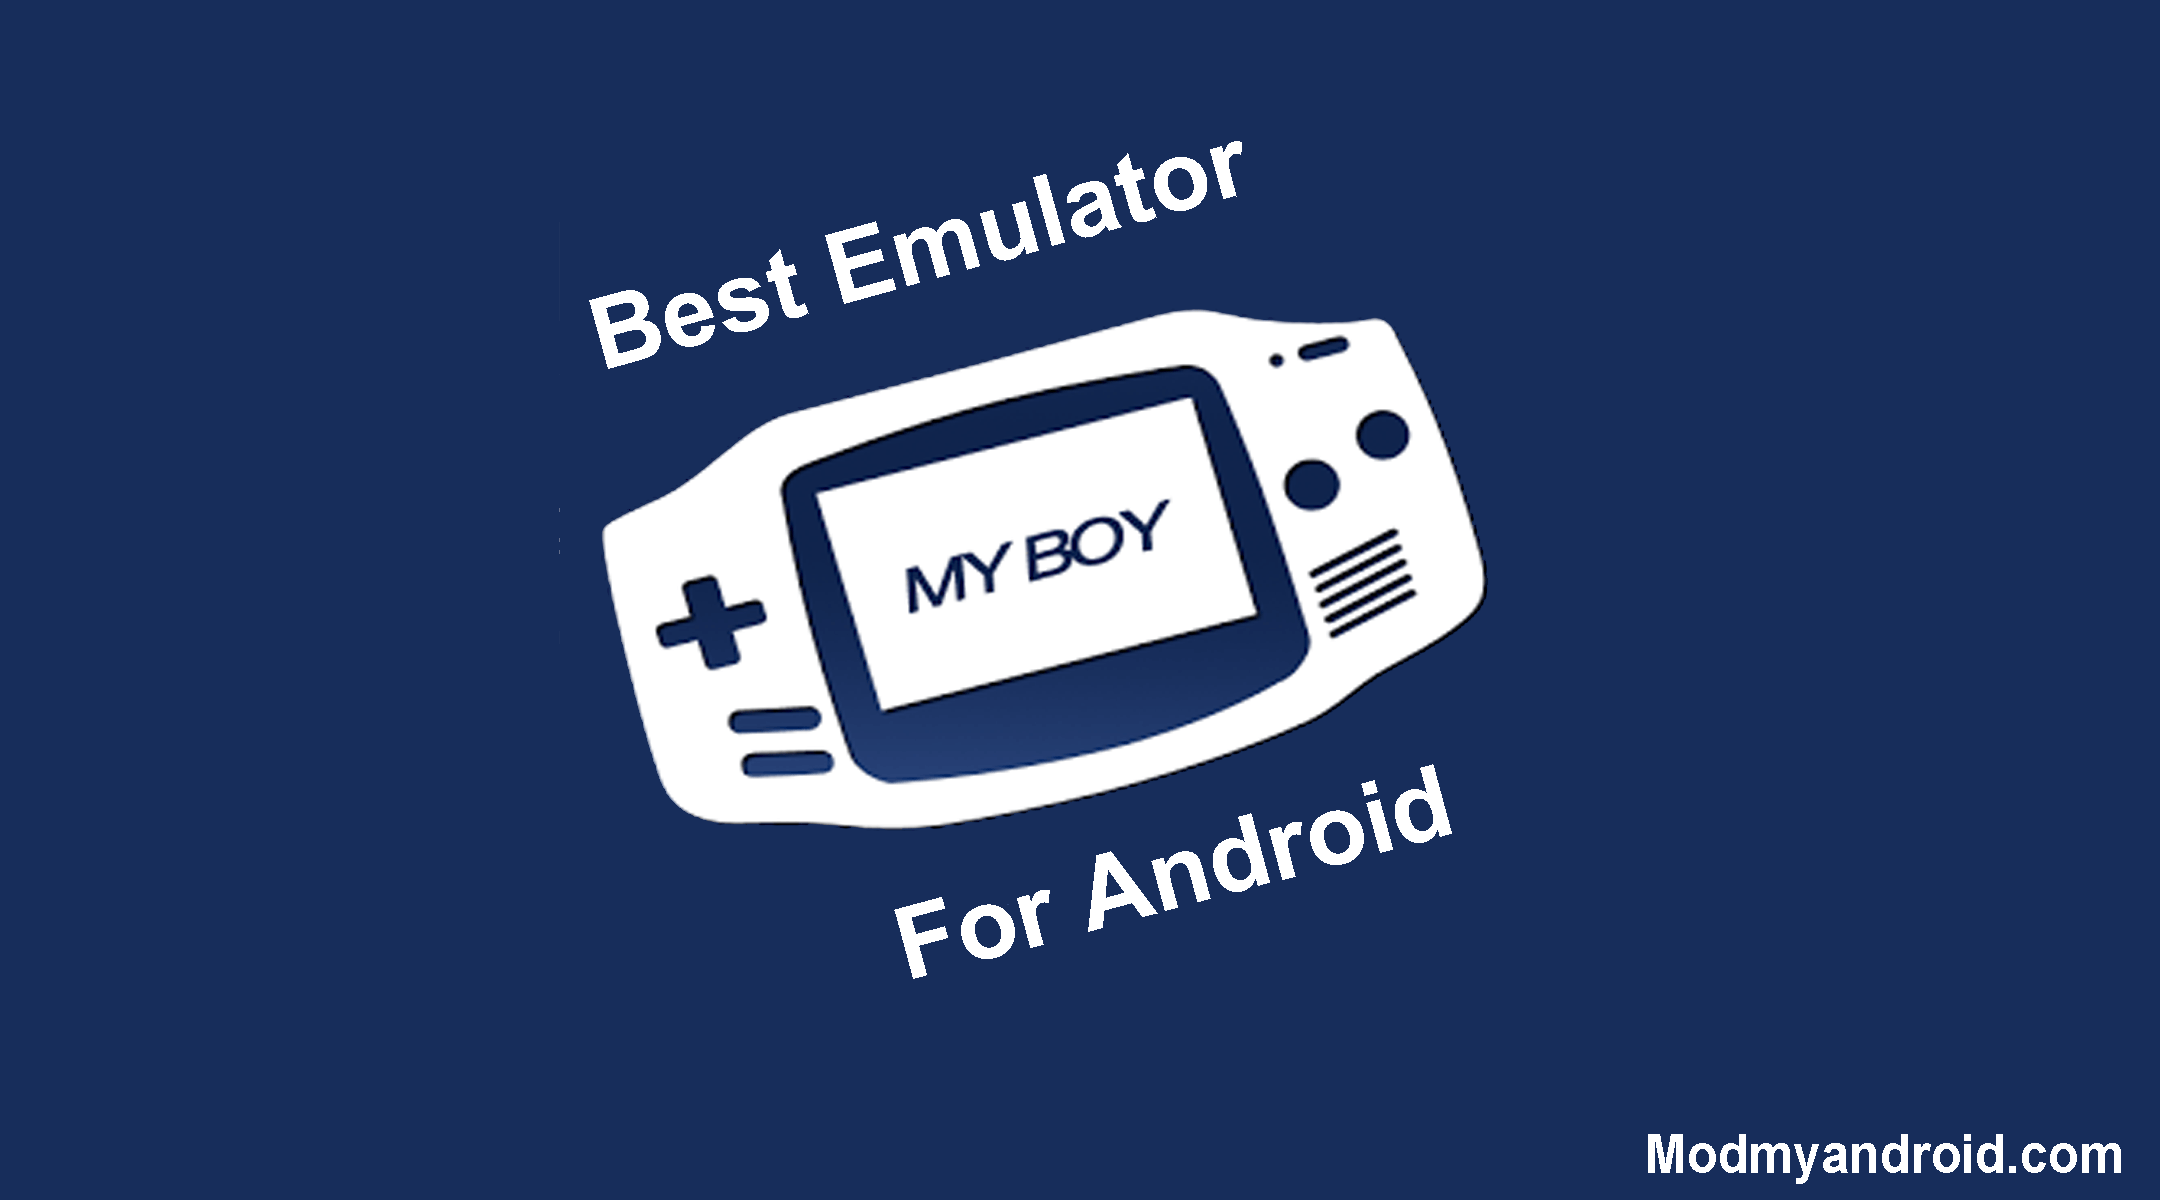 gba emulator for pc and mac